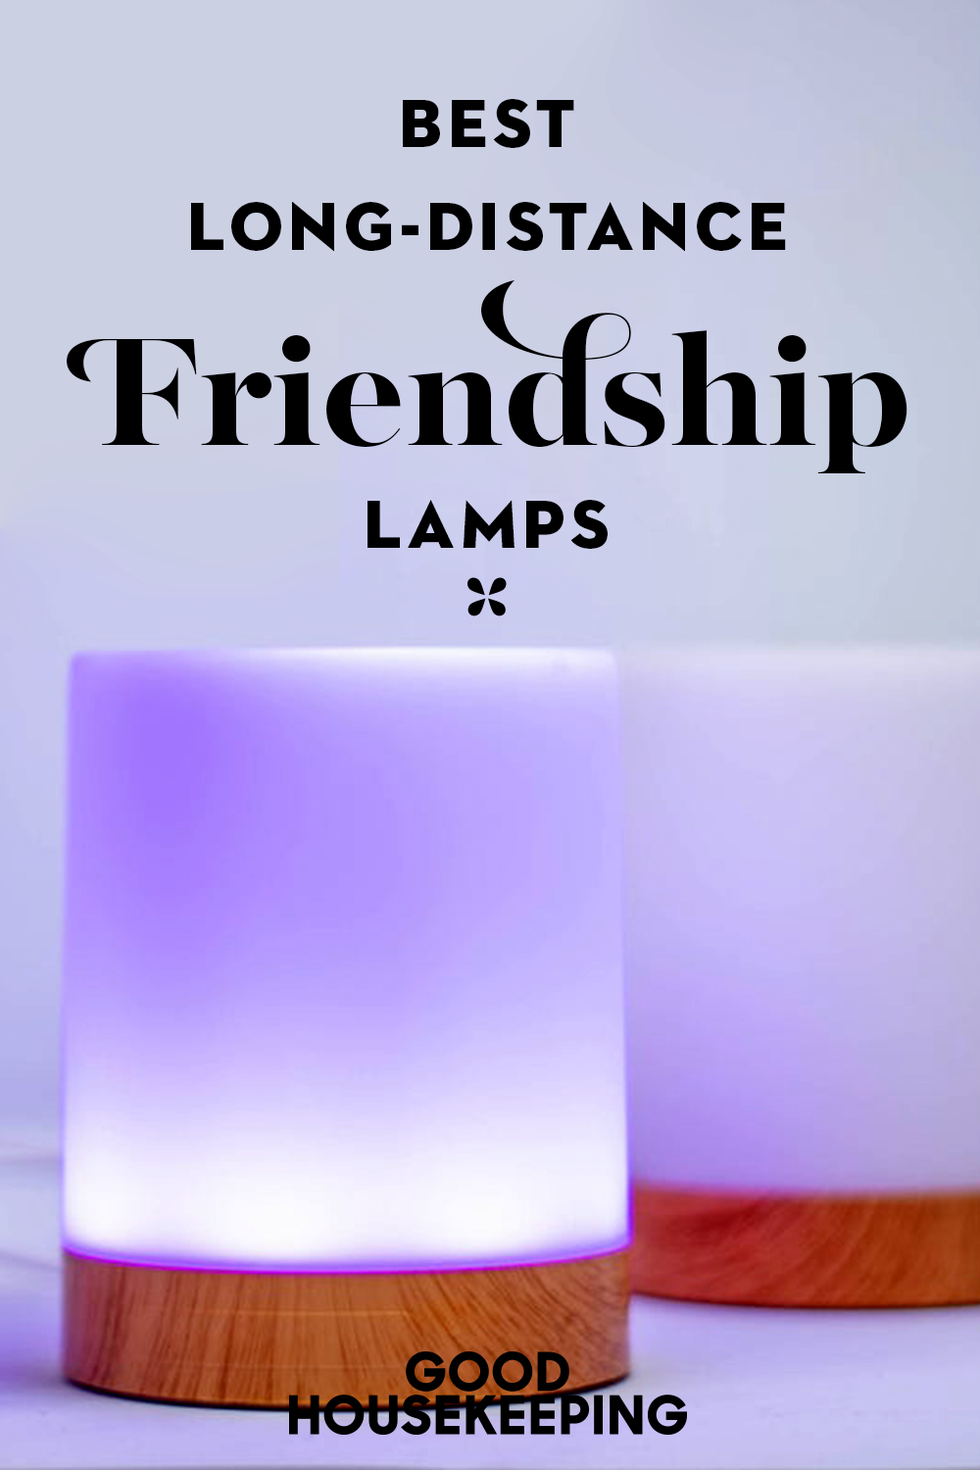 https://hips.hearstapps.com/hmg-prod/images/gh-032020-best-long-distance-friendship-lamps-1584738641.png?crop=1xw:1xh;center,top&resize=980:*